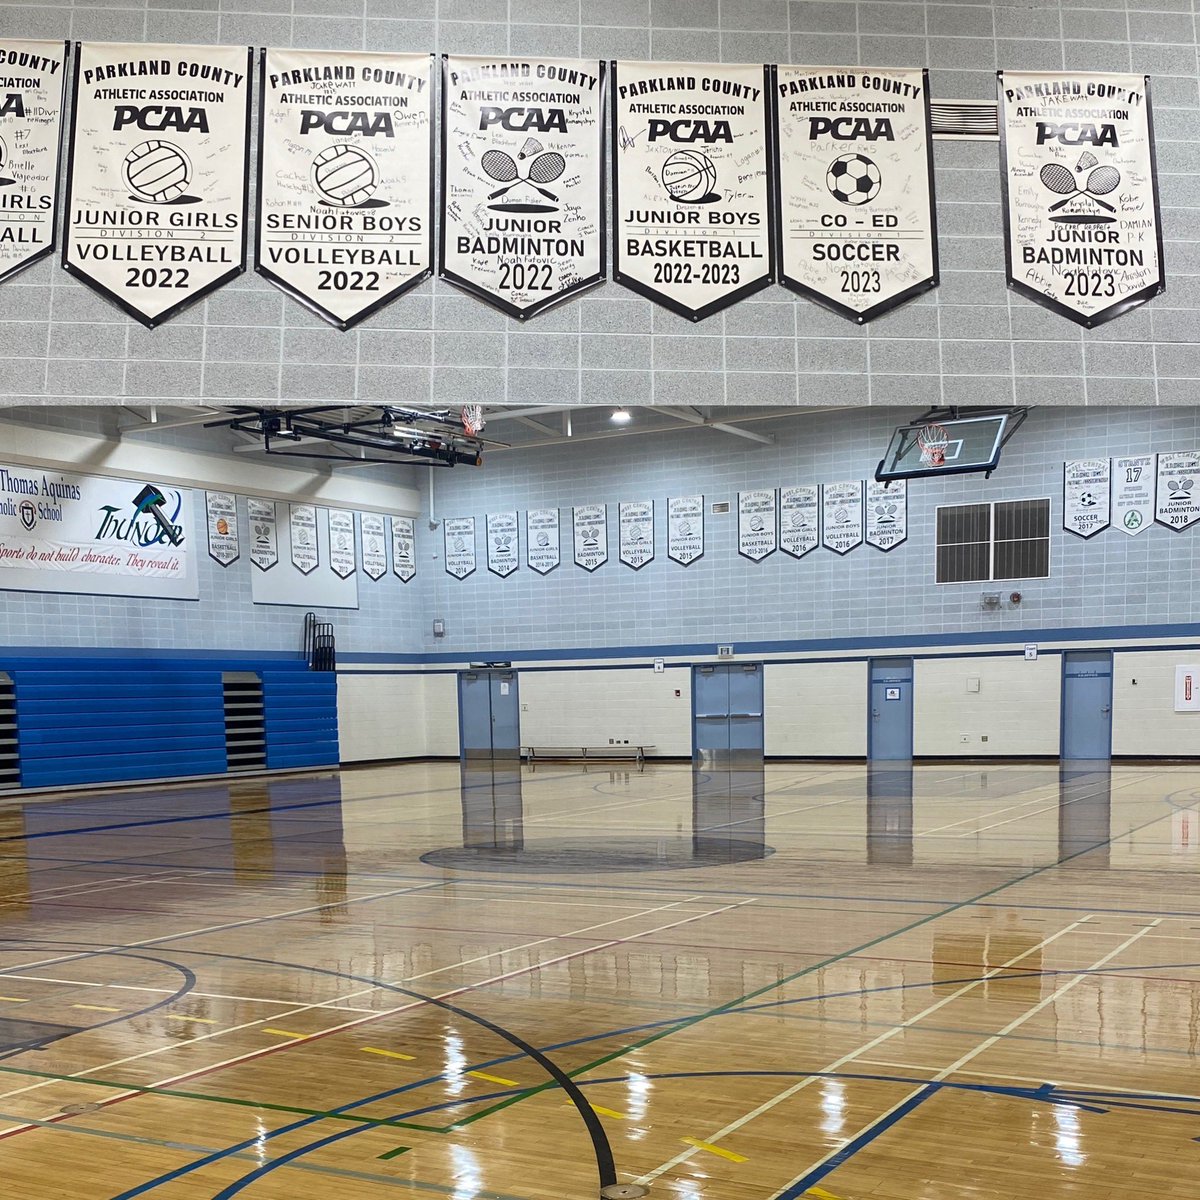 Gym floor sanded, stained and ready for the 2023 school year. Those banners don’t look too shabby either! #feelthethunder⚡️ #welcomebackstudents🤓📚✏️